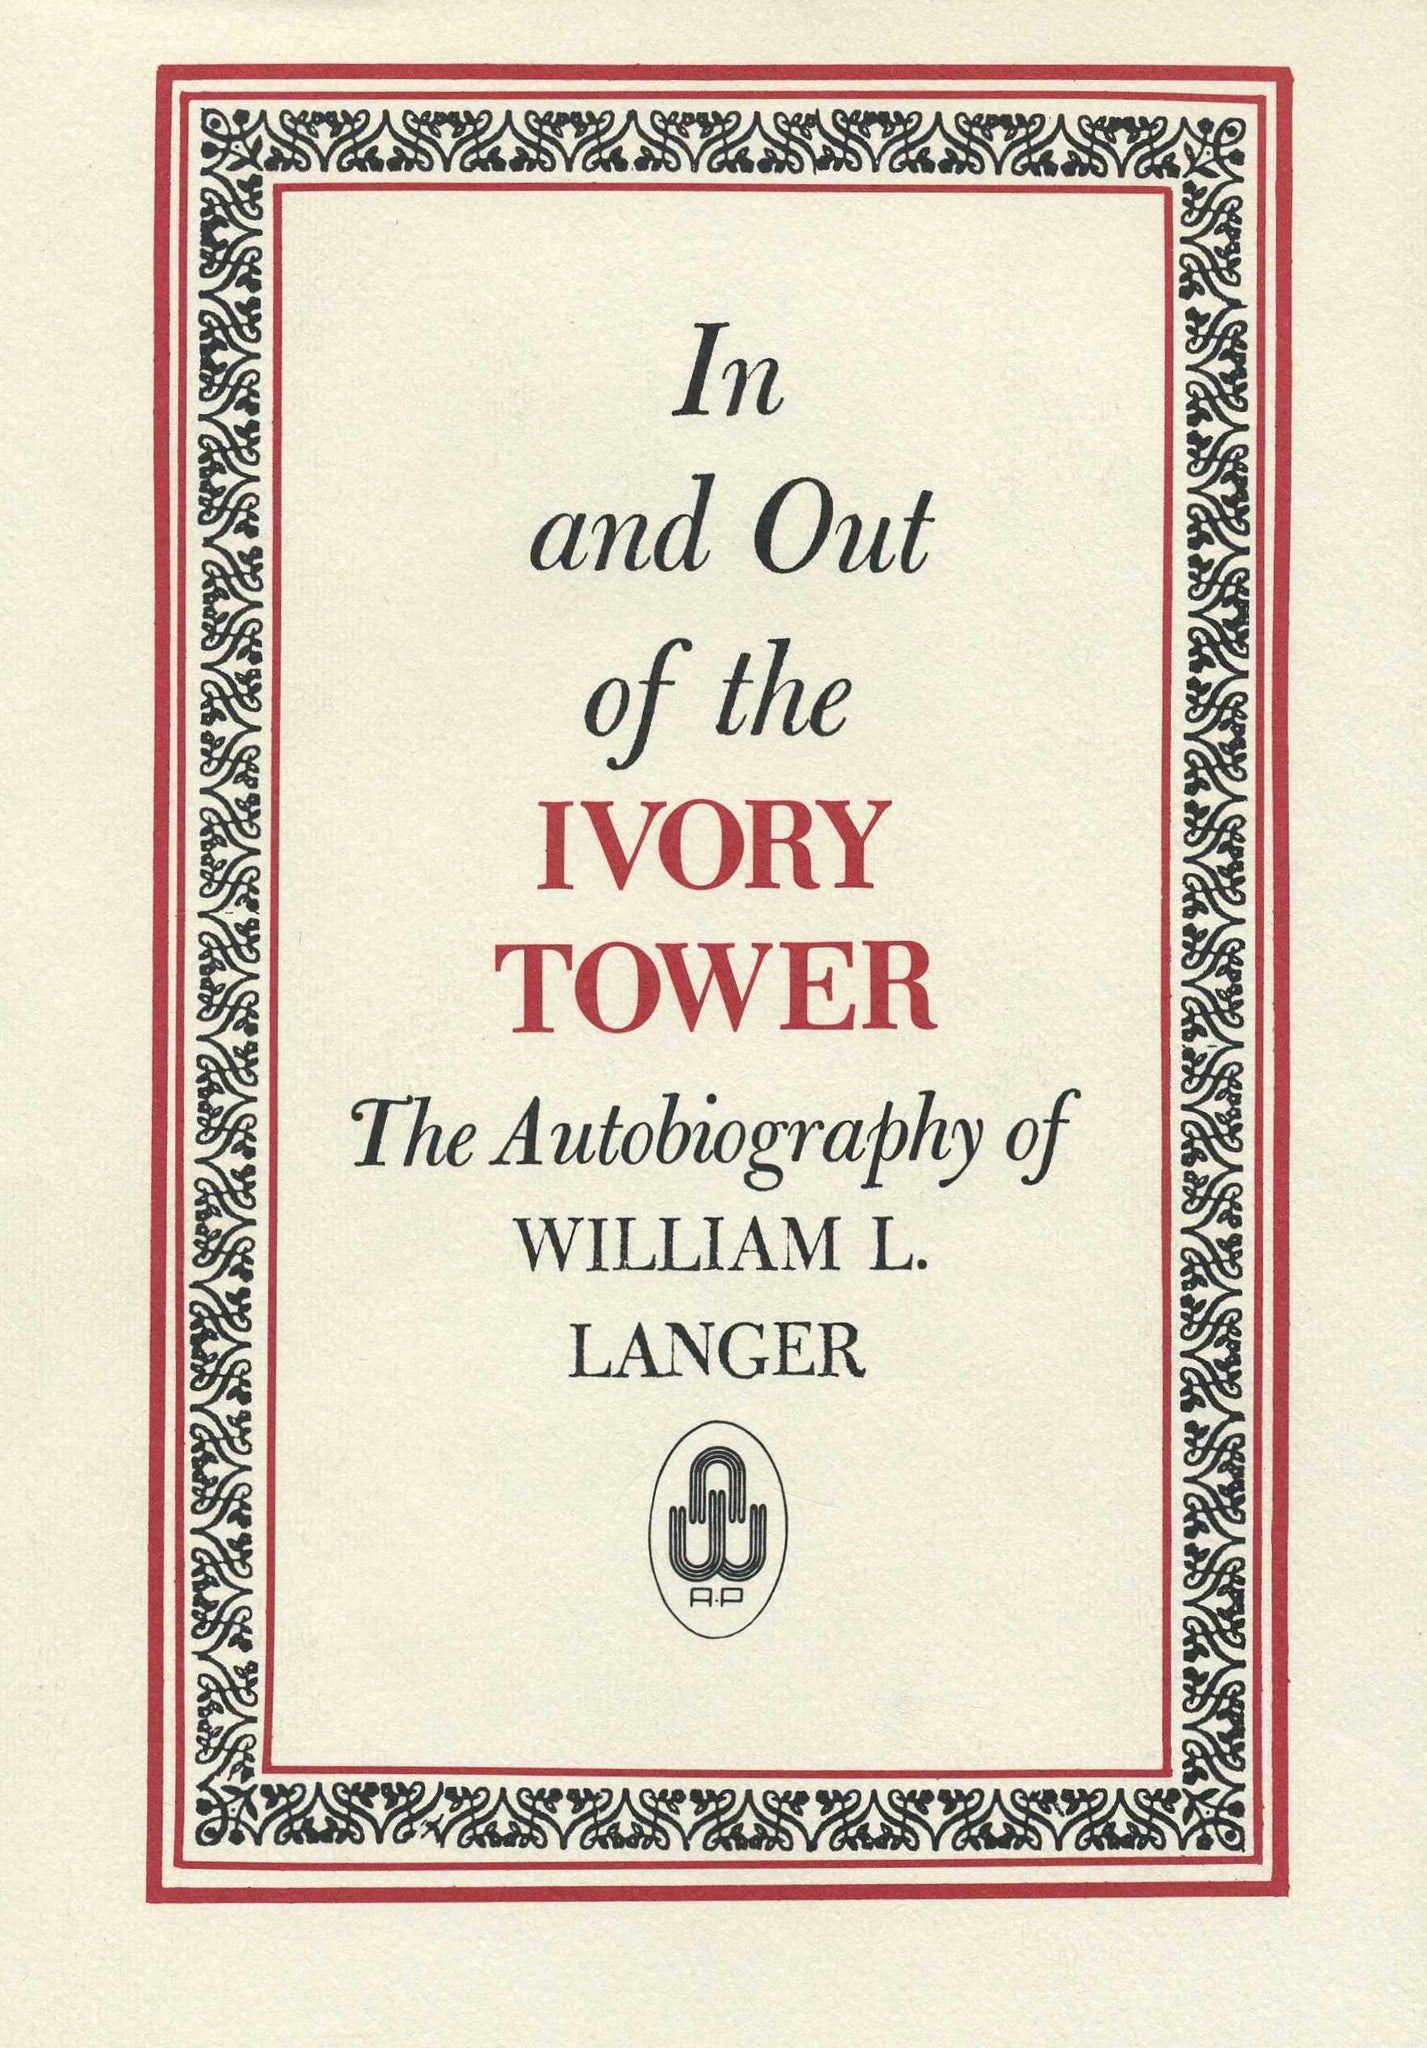 IN AND OUT OF THE IVORY TOWER: The Autobiography of William L. Langer